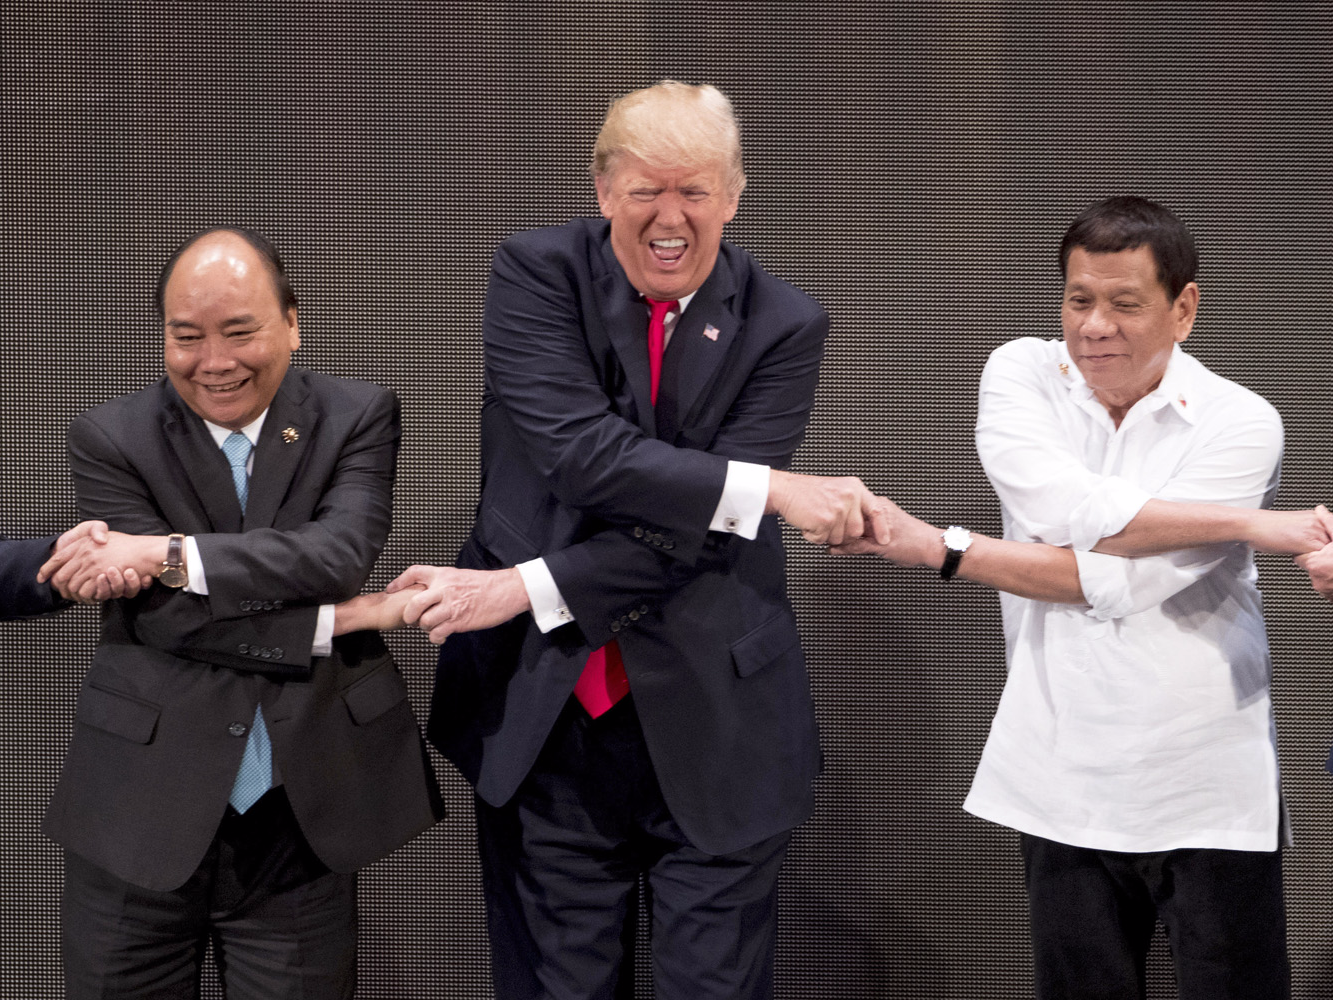 the-internet-is-loving-trumps-latest-awkward-handshake-from-his-asia-trip.jpg